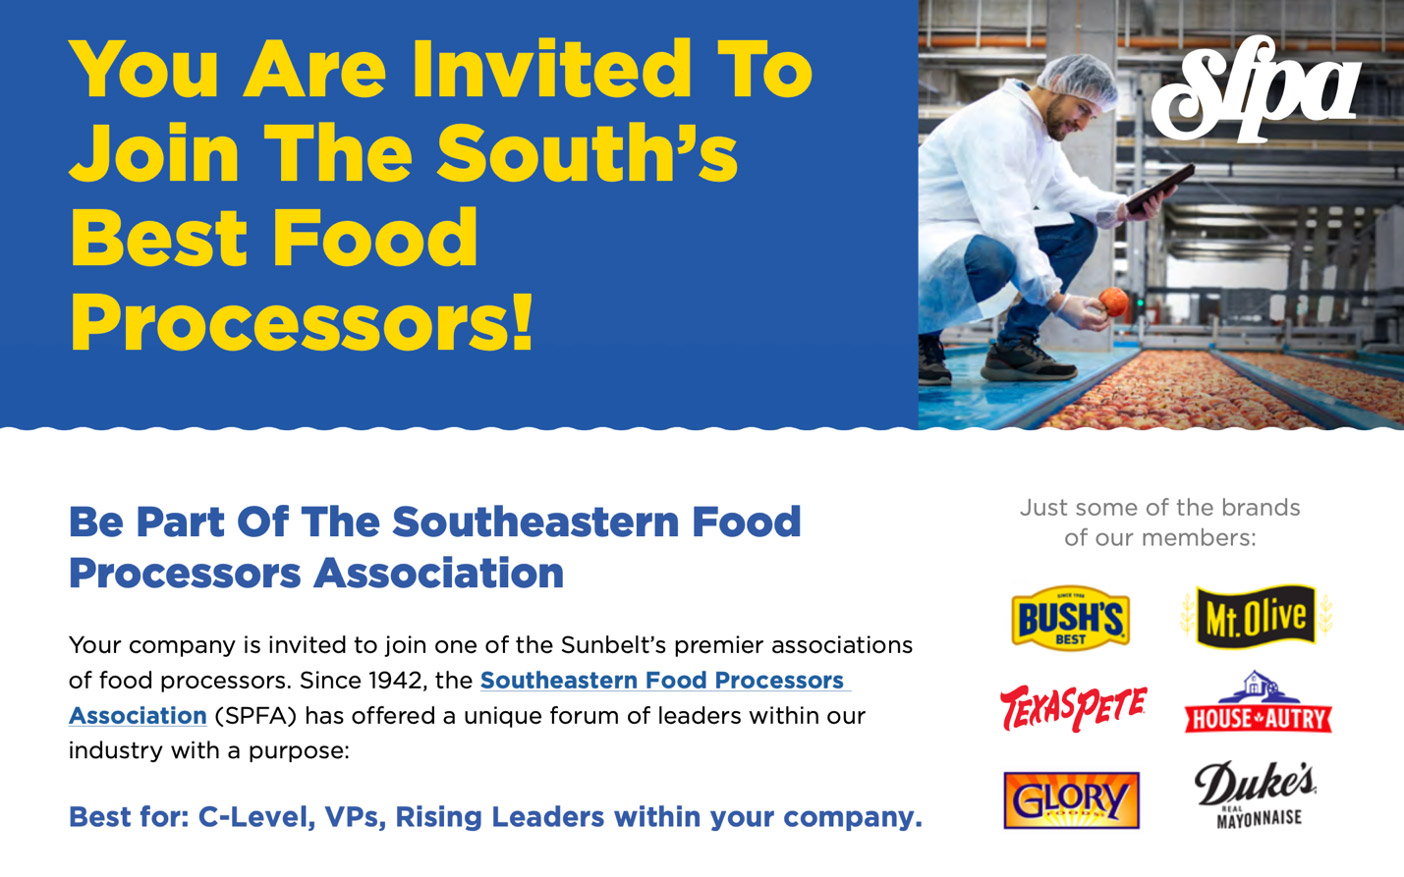 Part of the new SPFA Food Processor Invitation available for you to send to potential members.